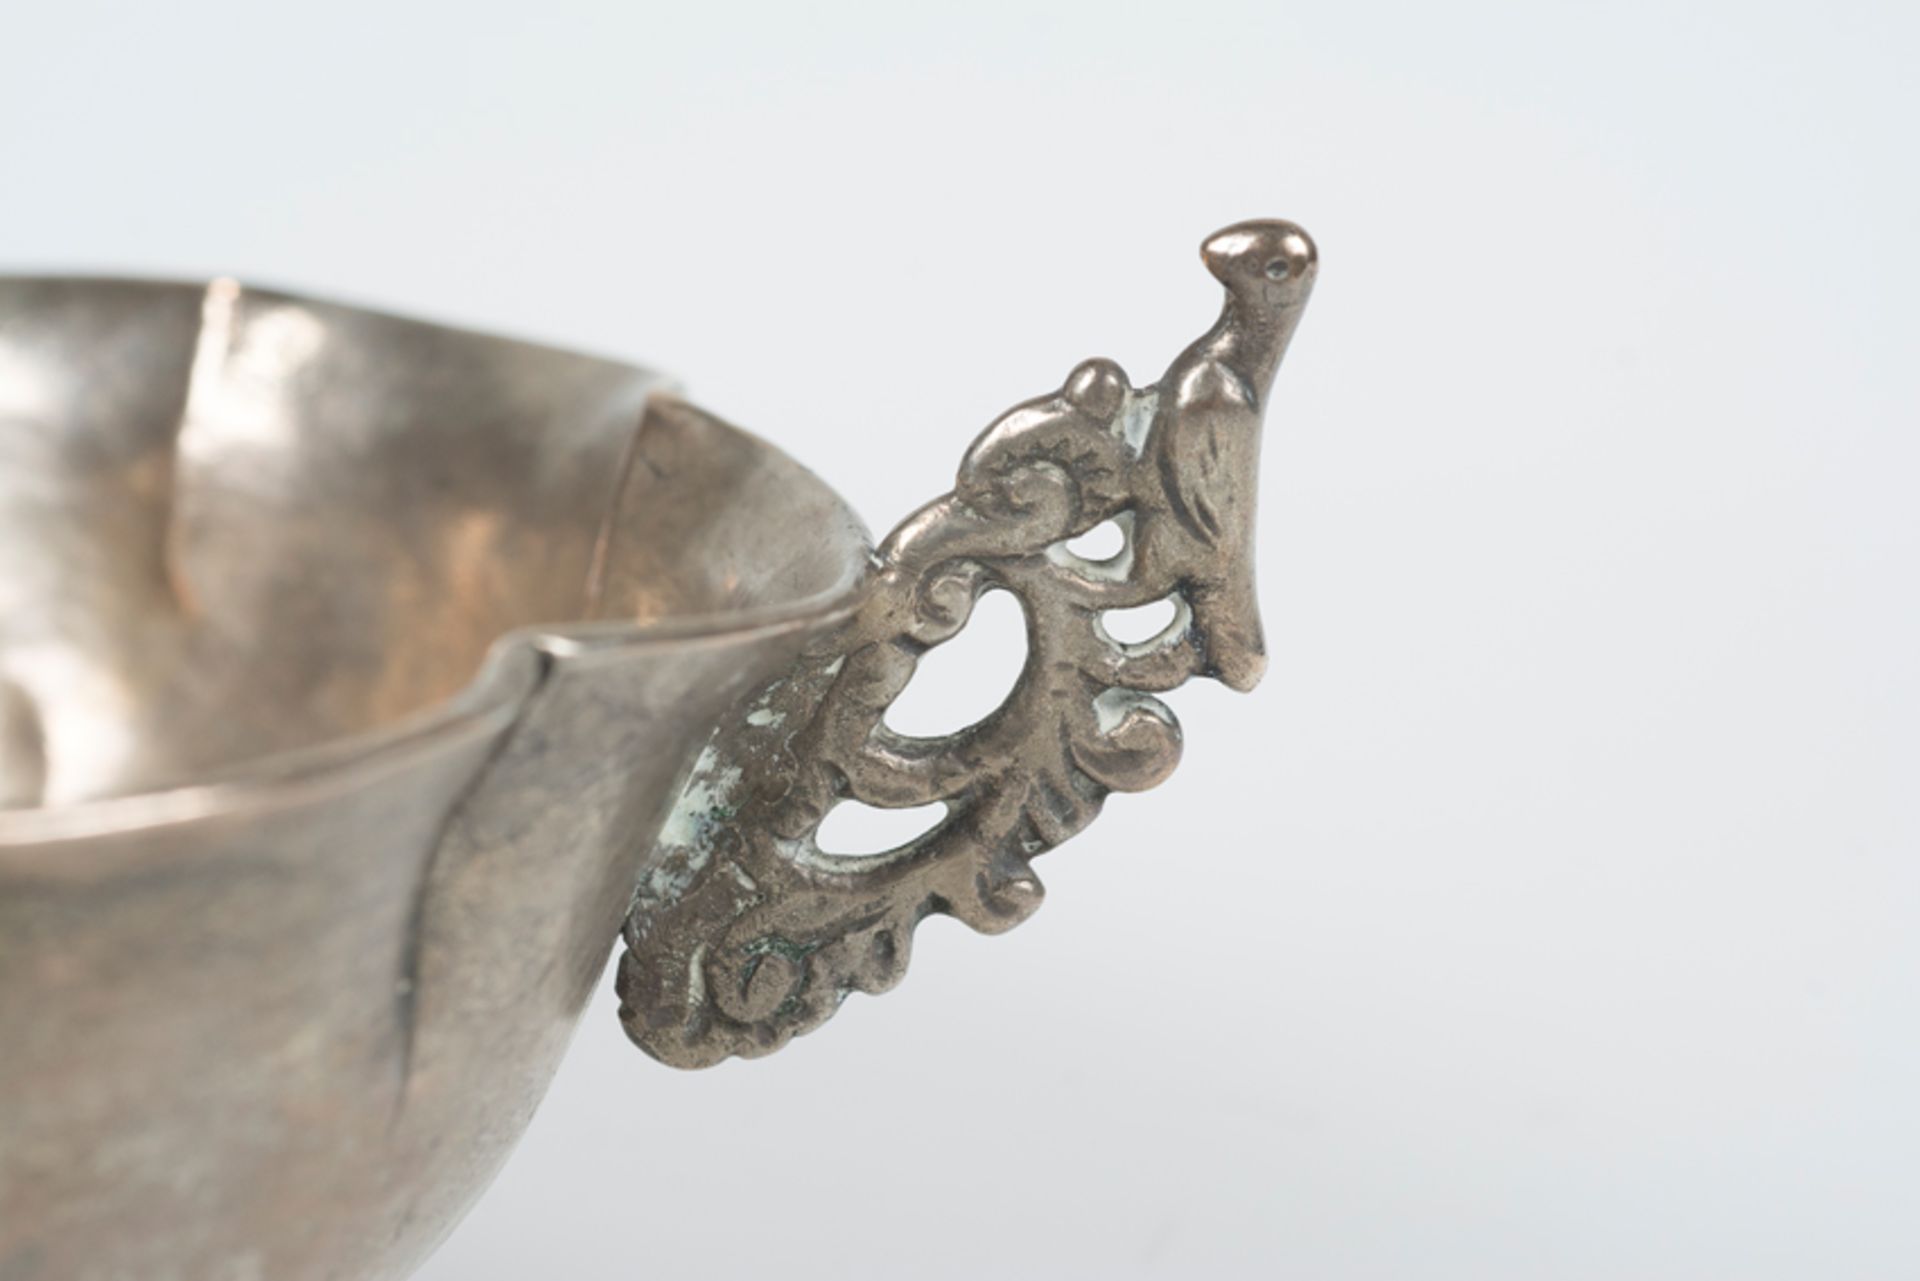 Spanish or colonial silver wine tasting cup. 17th century. - Image 6 of 6